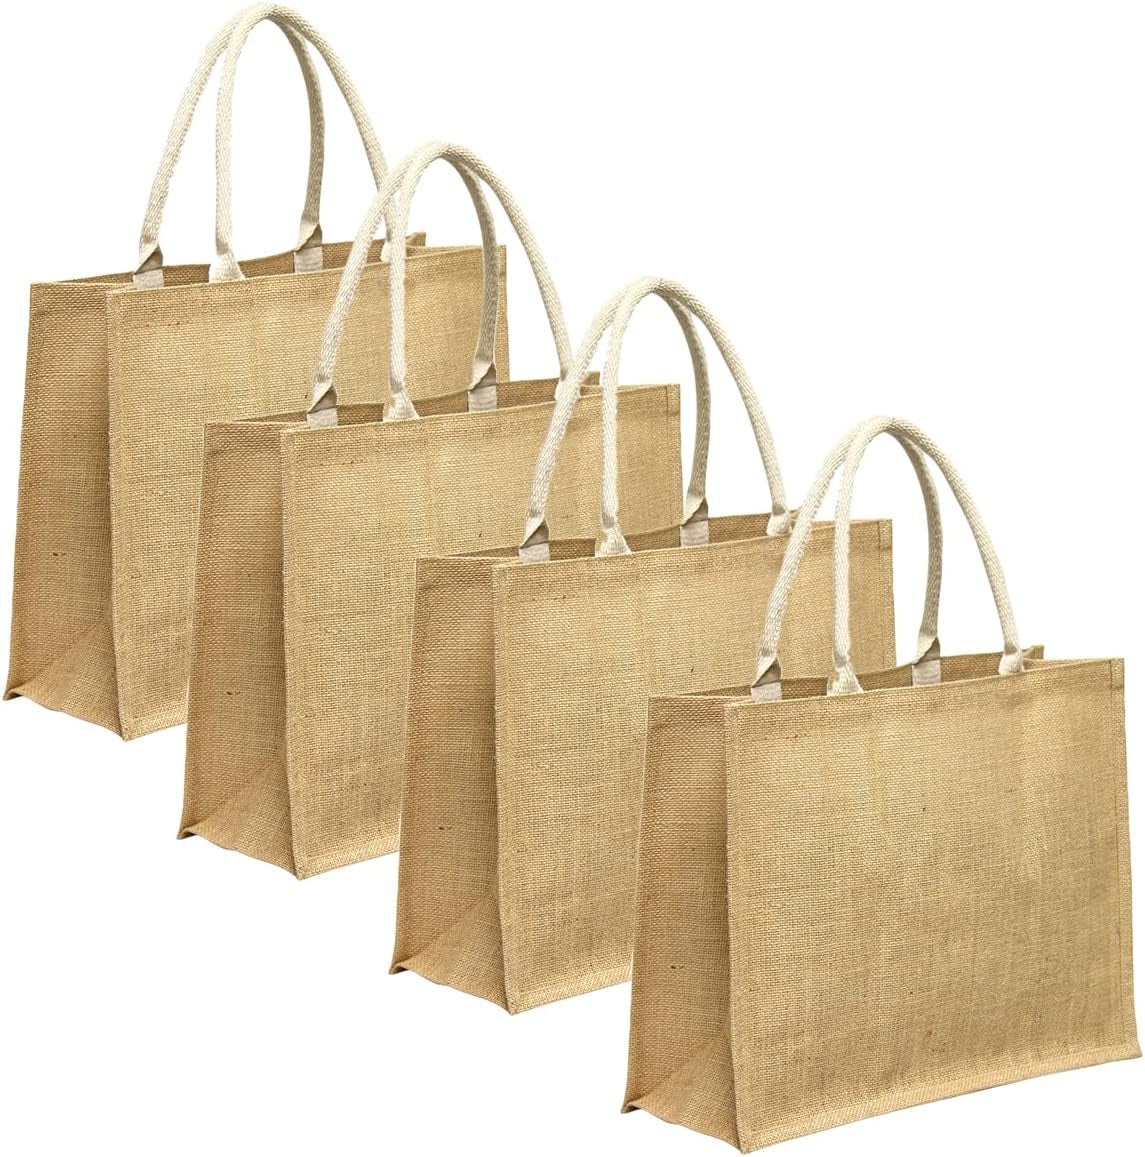 Terra Jute Burlap Tote with Rope Handles, Great for Grocery Shopping, Beah, Leisure, or Travel, Eco Friendly & Reusable (Set of 4)